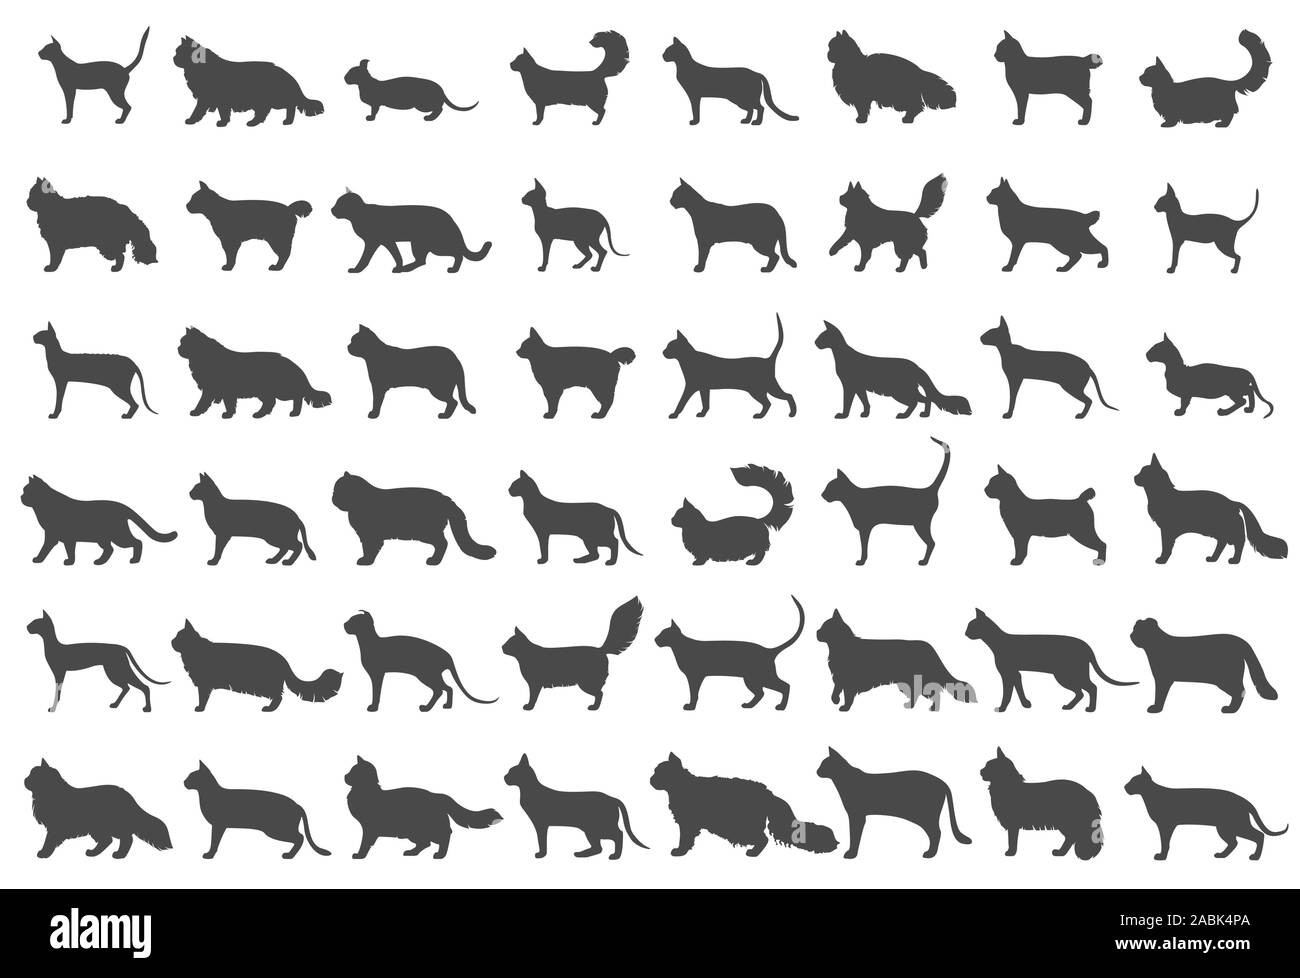 Cat breeds icon set flat style isolated on white. Cartoon silhouettes cats characters collection. Vector illustration Stock Vector